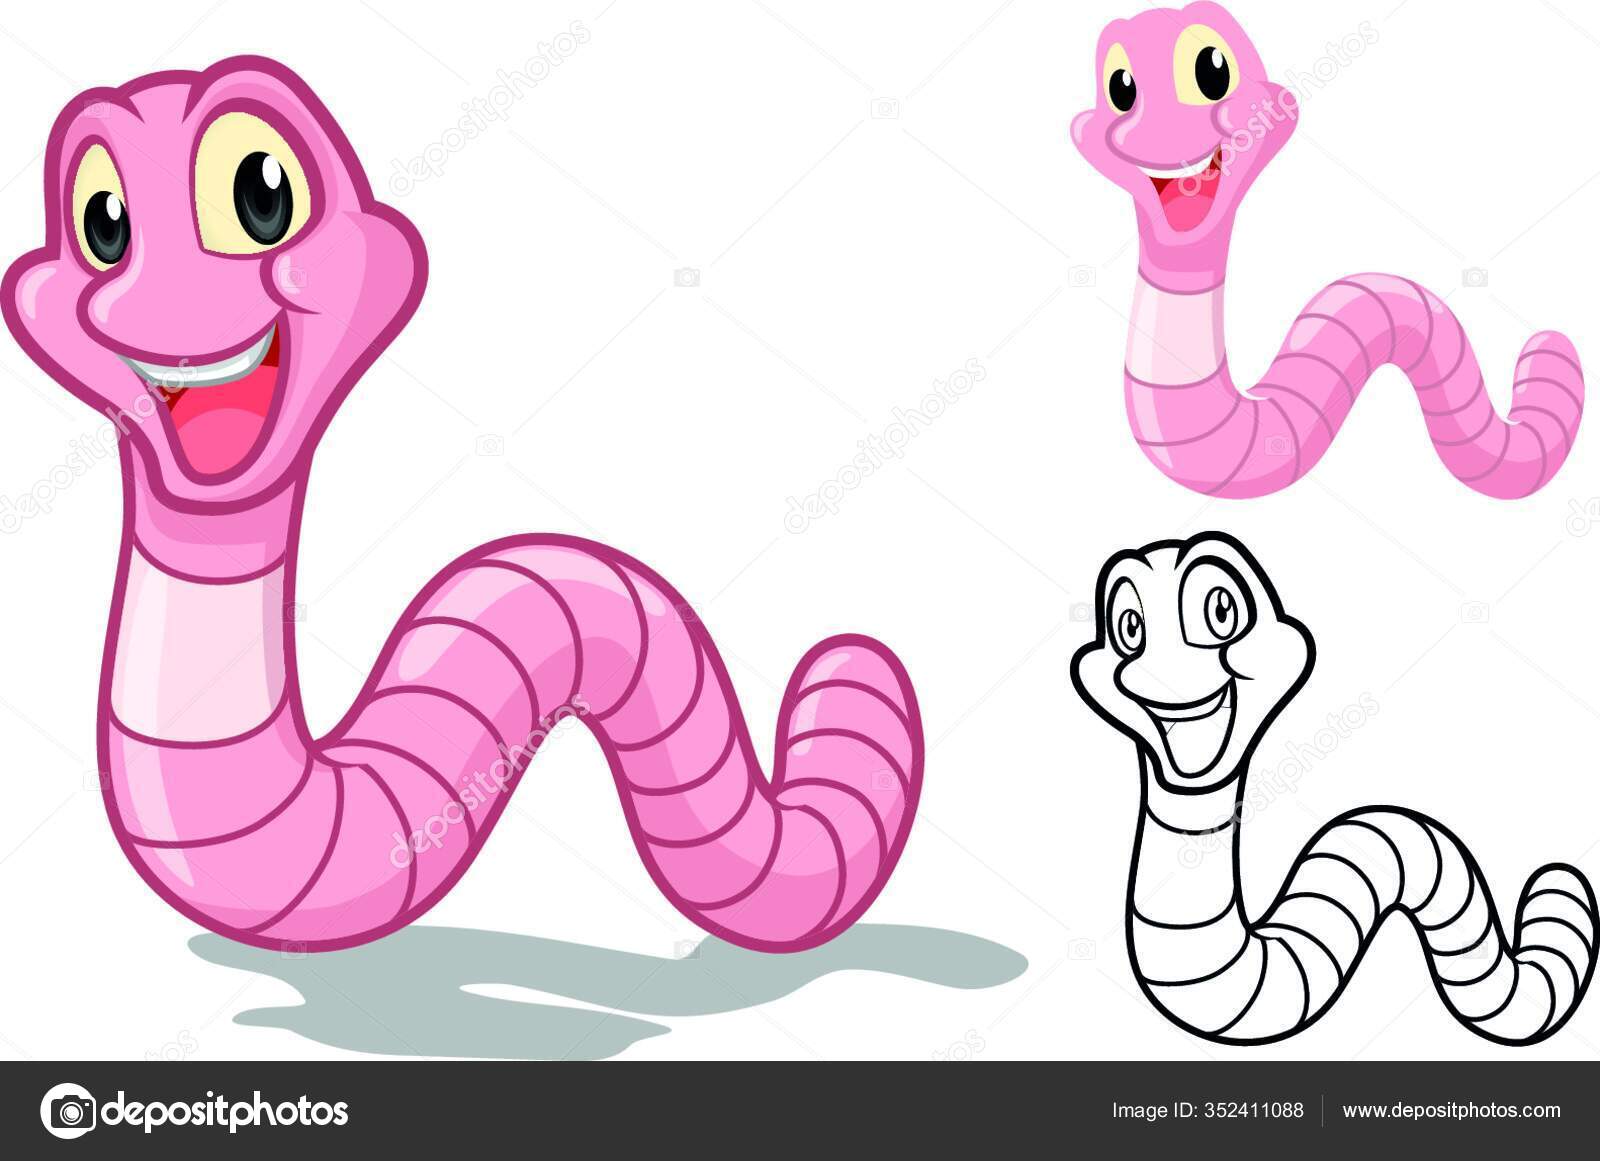 Image High Quality Detailed Earthworm Cartoon Character Flat